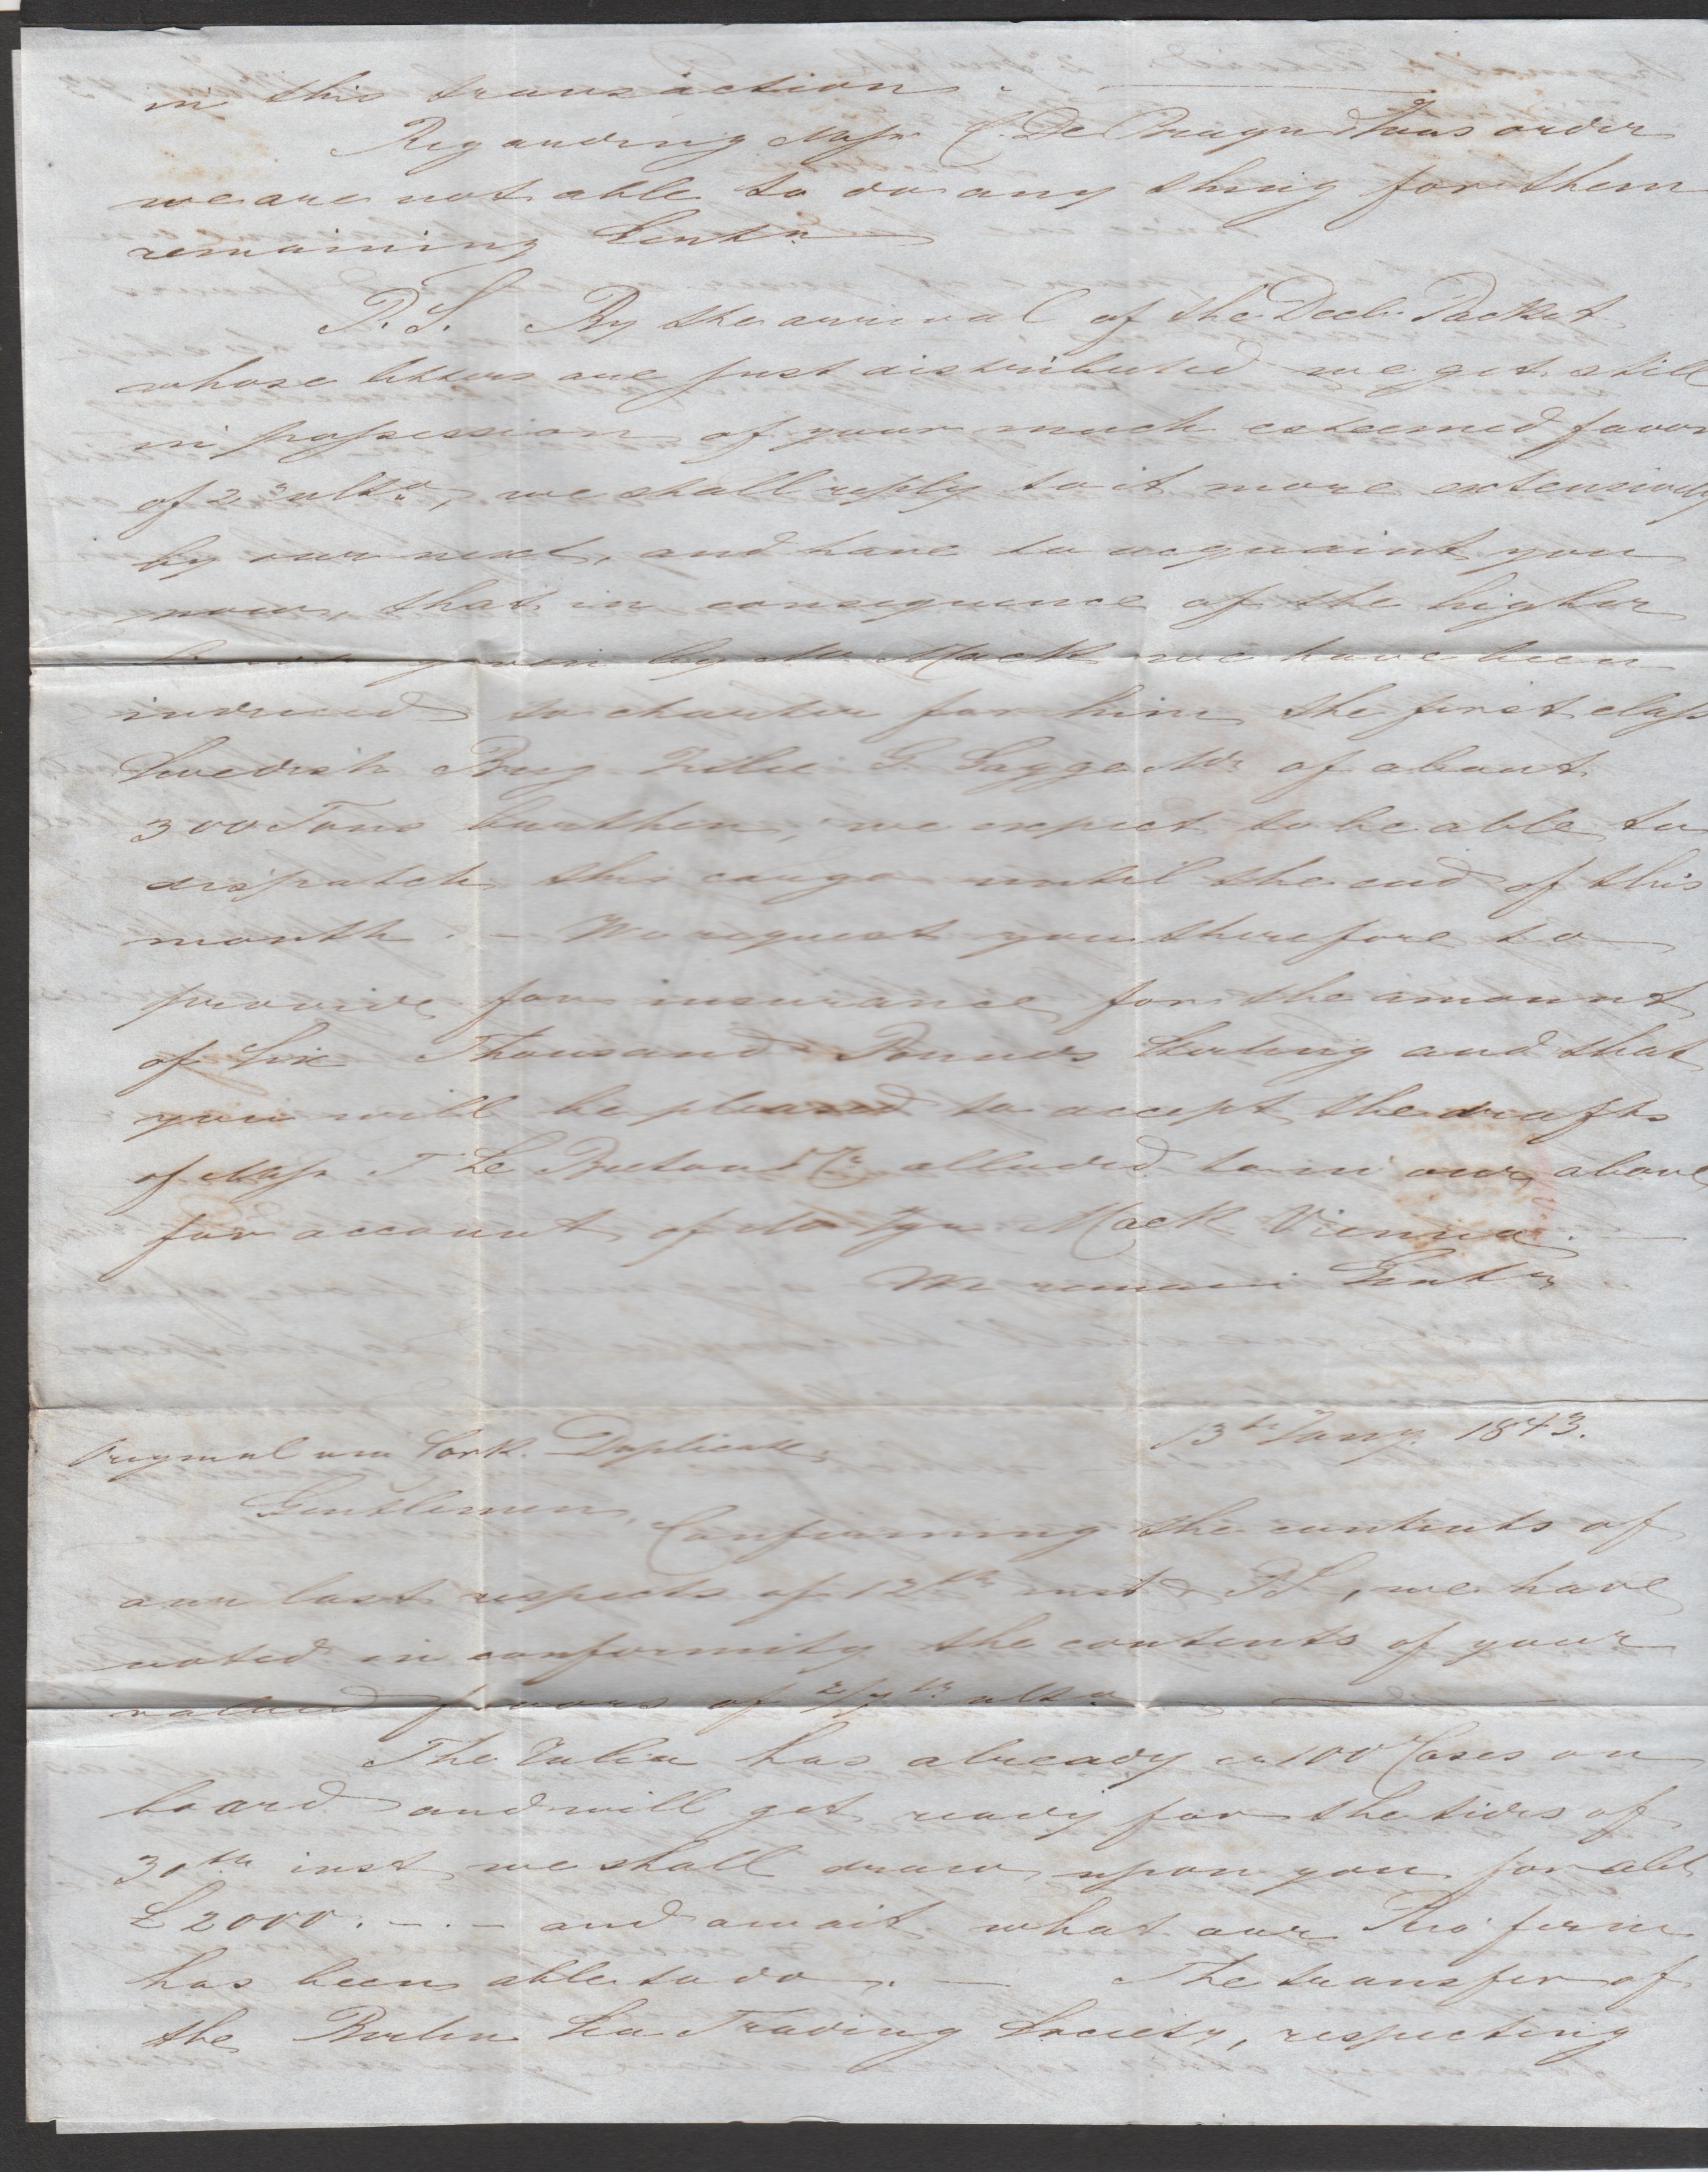 G.B. - Ireland - Ship Letters 1842 Entire Letter from Pernambuco to London, landed at Cork and hands - Image 4 of 7